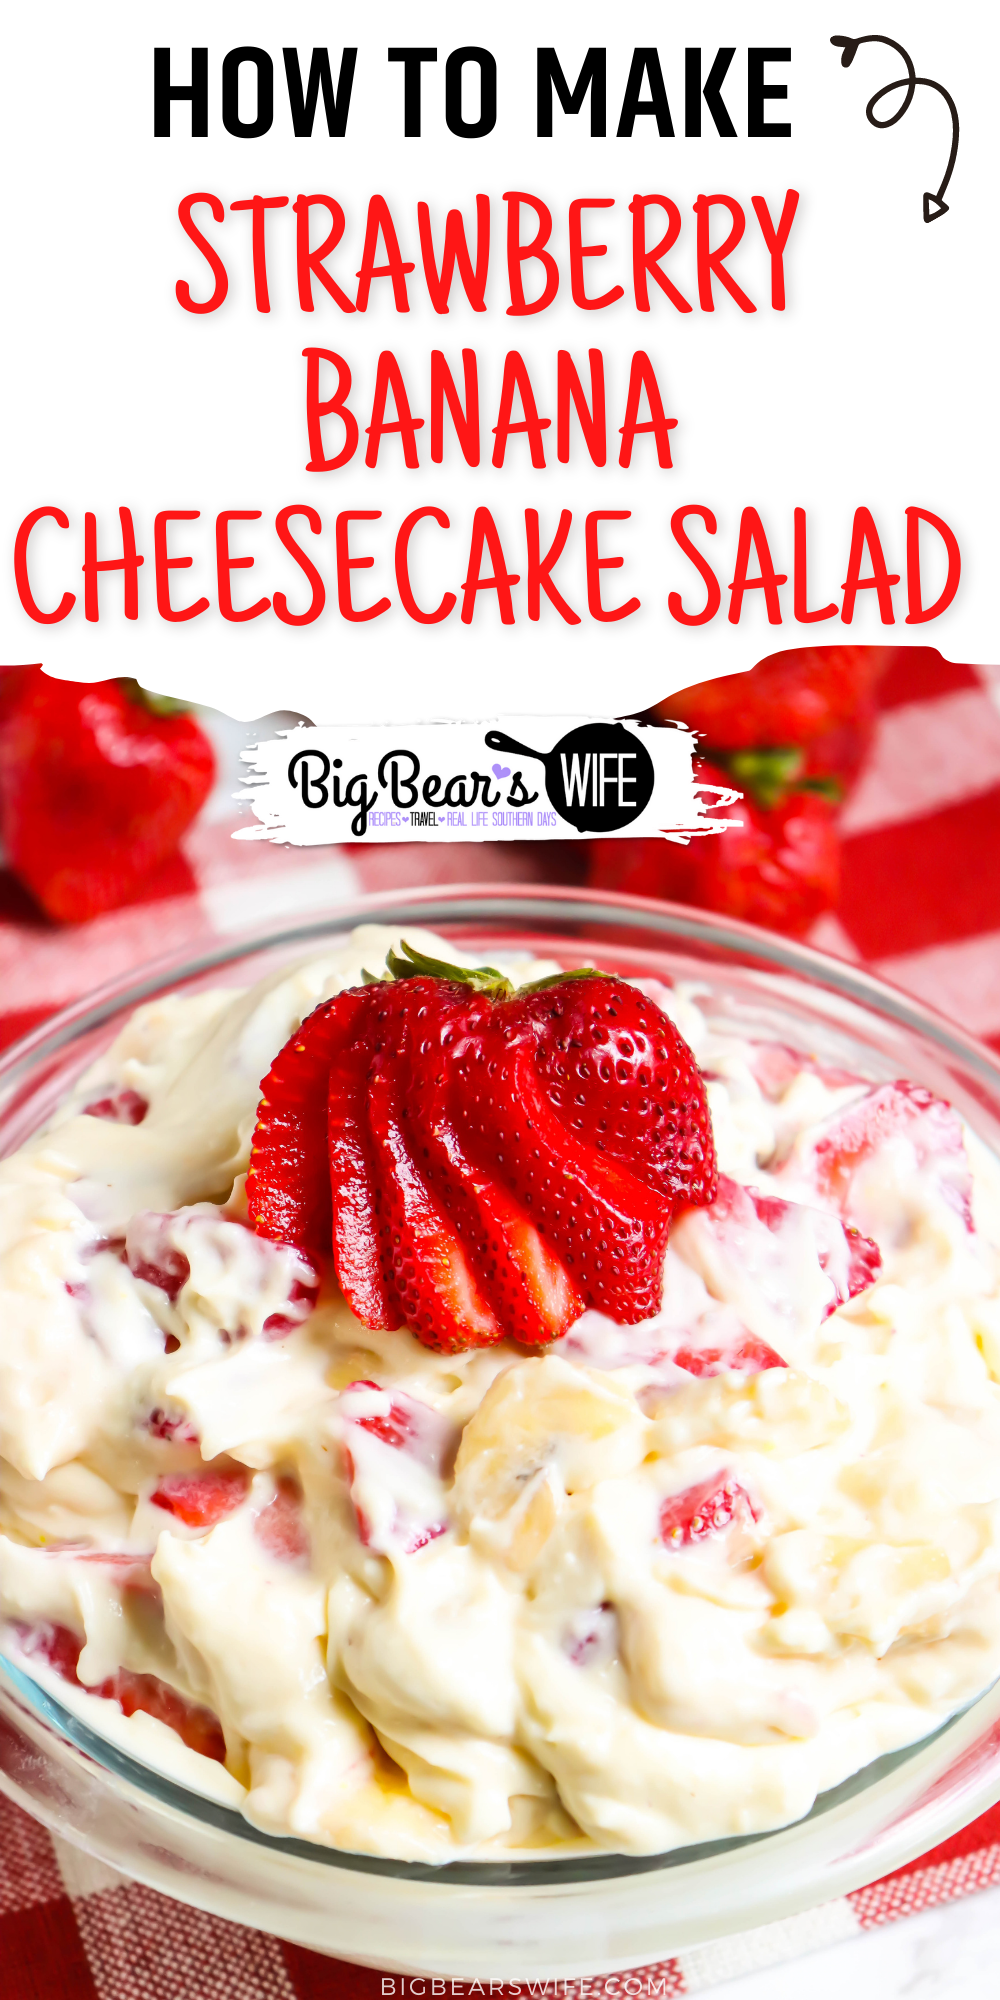 Strawberry Banana Cheesecake Salad combines sliced strawberries, sliced bananas and banana pudding to make a chilly southern dessert salad! Easy to make and easy to love! via @bigbearswife